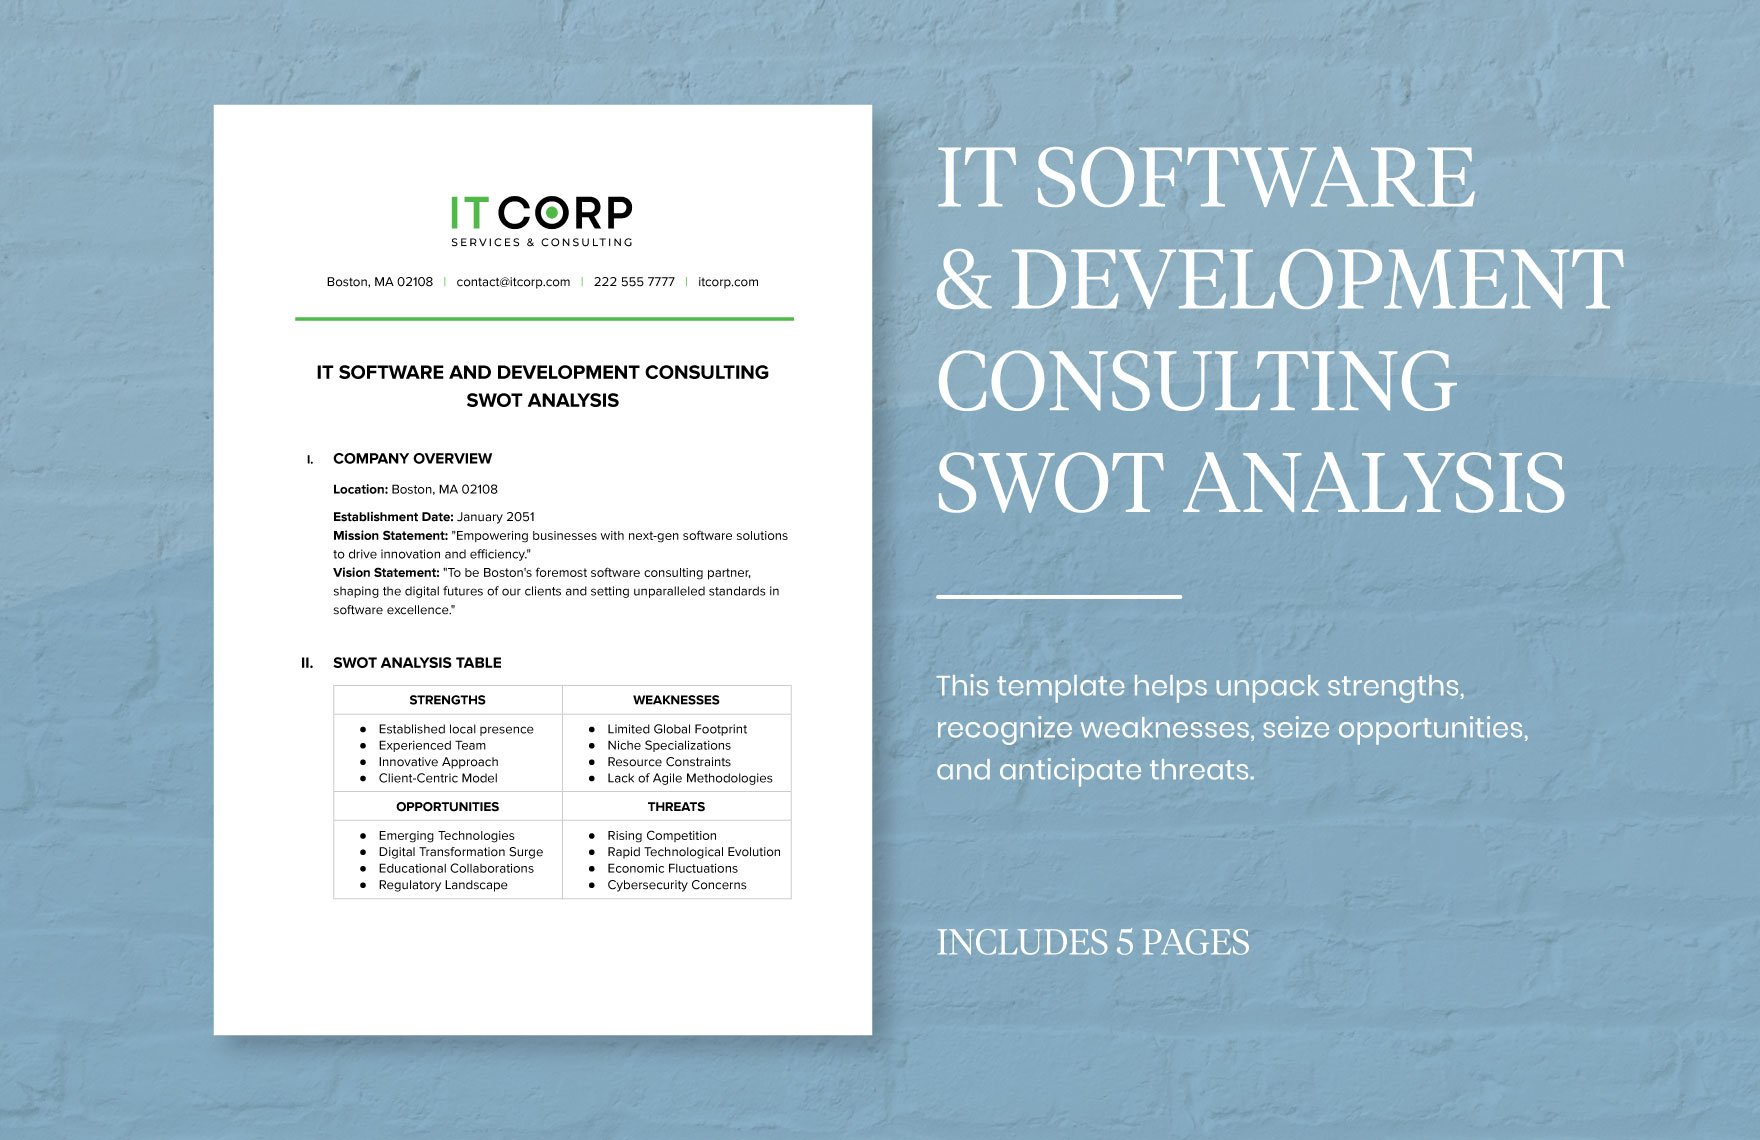 IT Software Development & Consulting SWOT Analysis Template